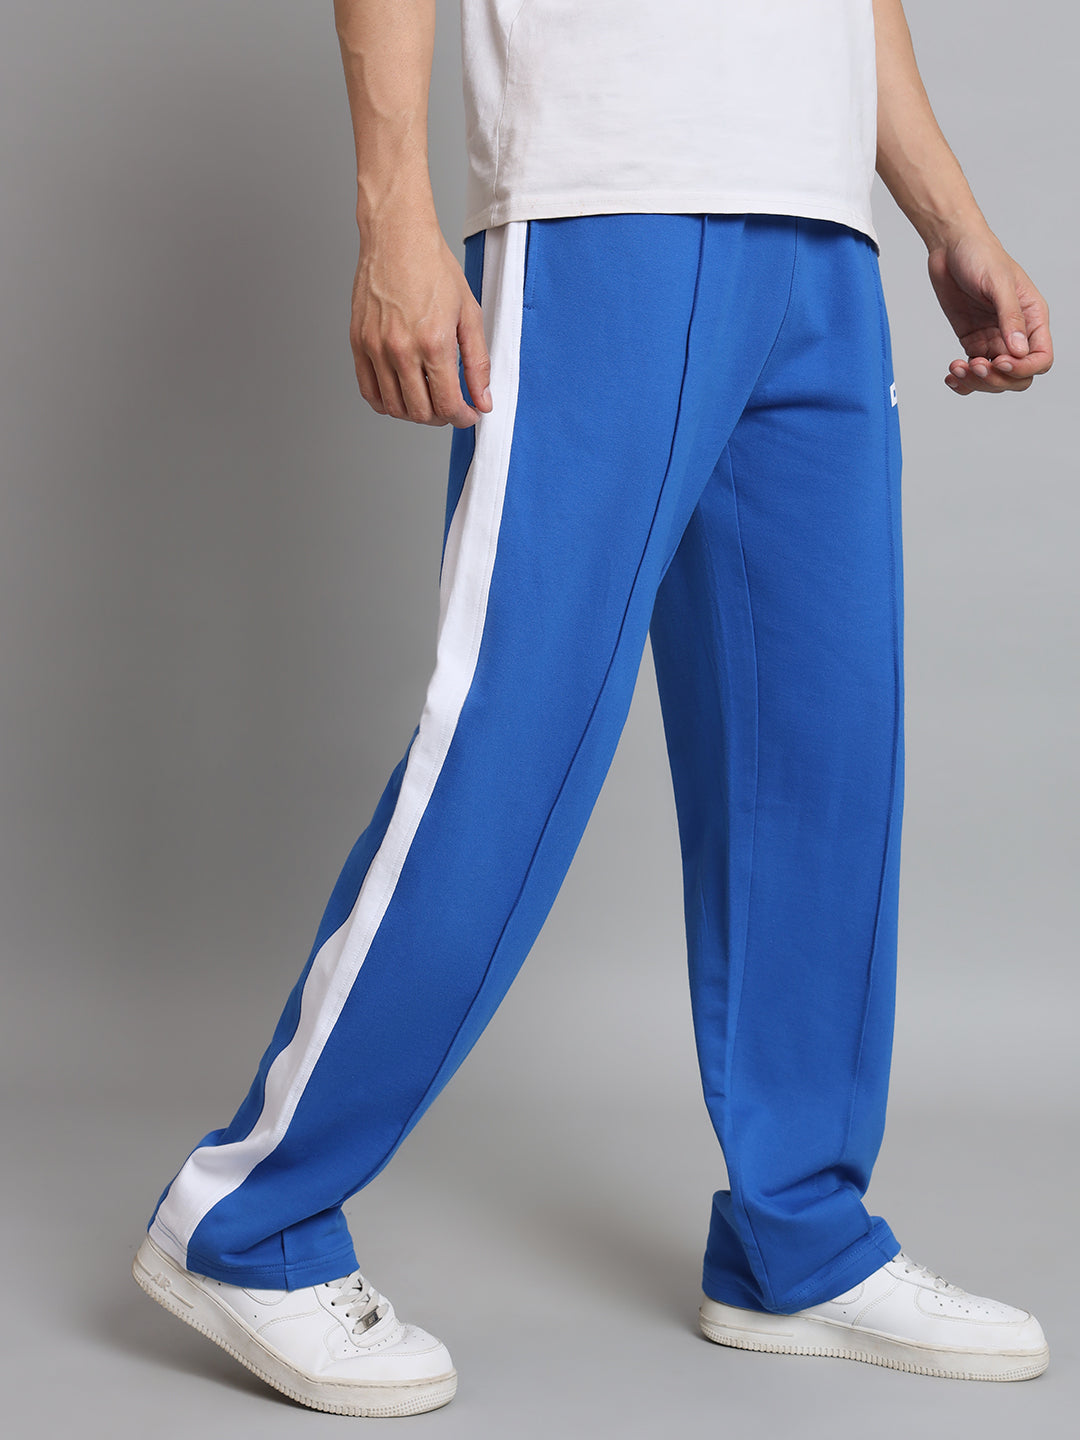 Contrast Side Seam  Front Plated Joggers (Royal Blue) - Wearduds